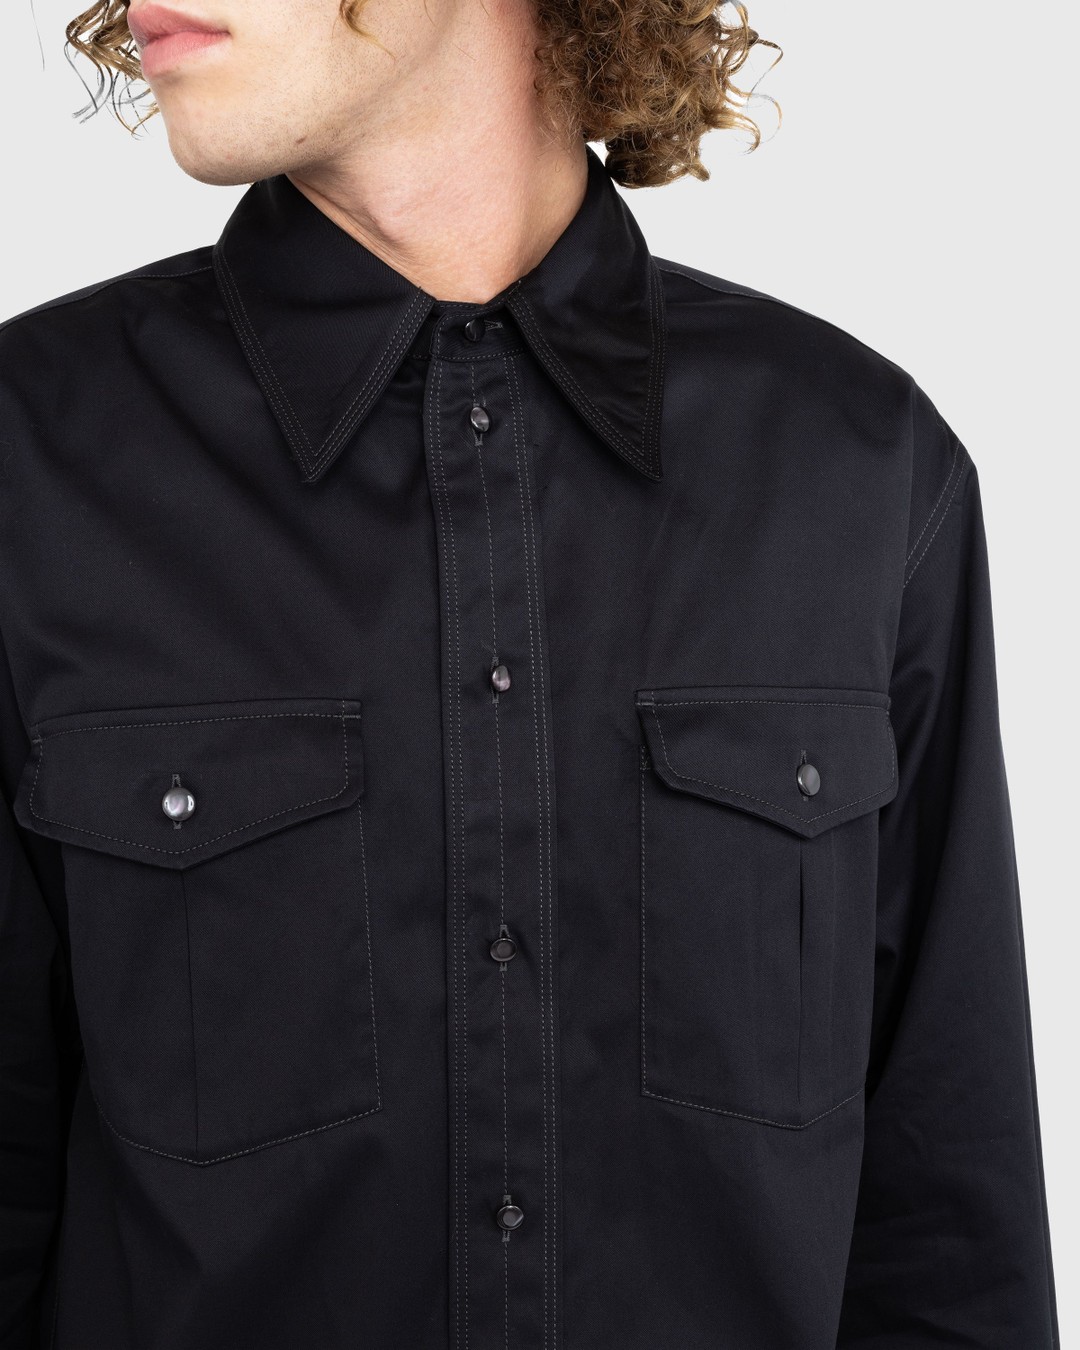 Lemaire – Relaxed Western Shirt Black | Highsnobiety Shop